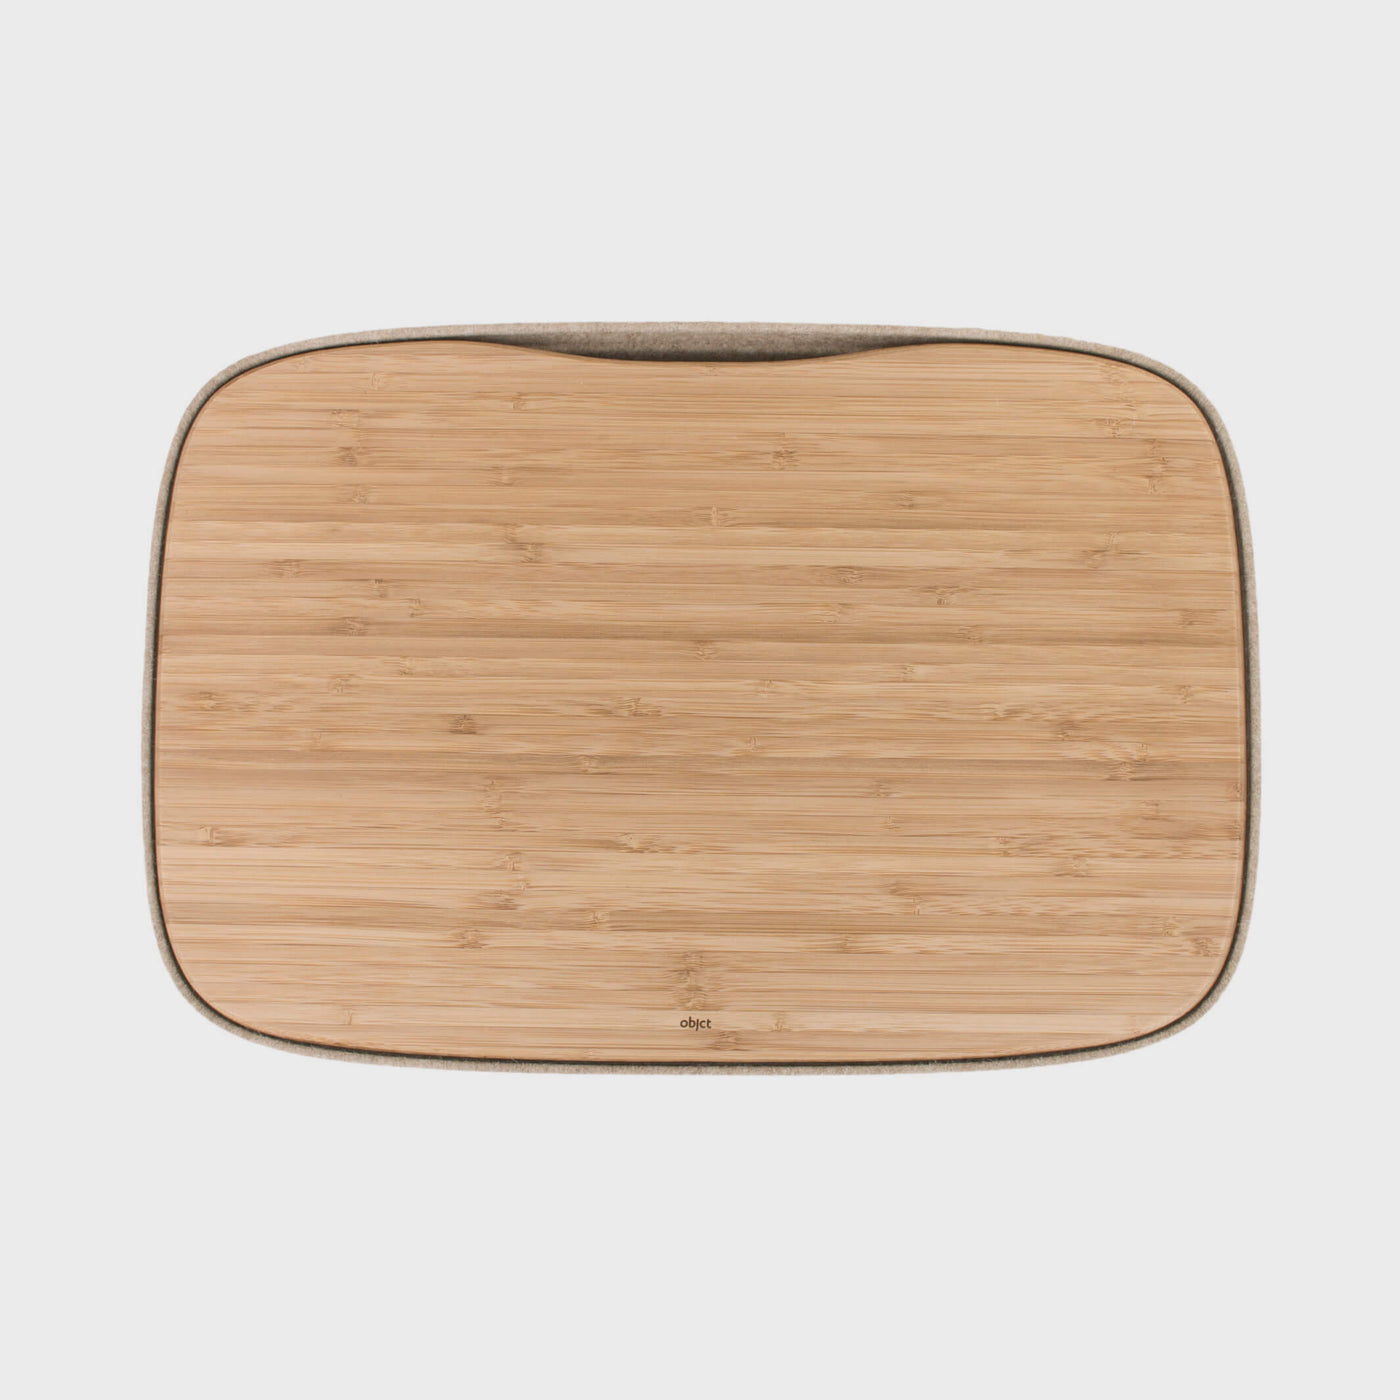 Top view of Lapod Lap Desk by Objct, in Oatmeal or Ash Grey, sustainable bamboo tray and felt showing cable management slot